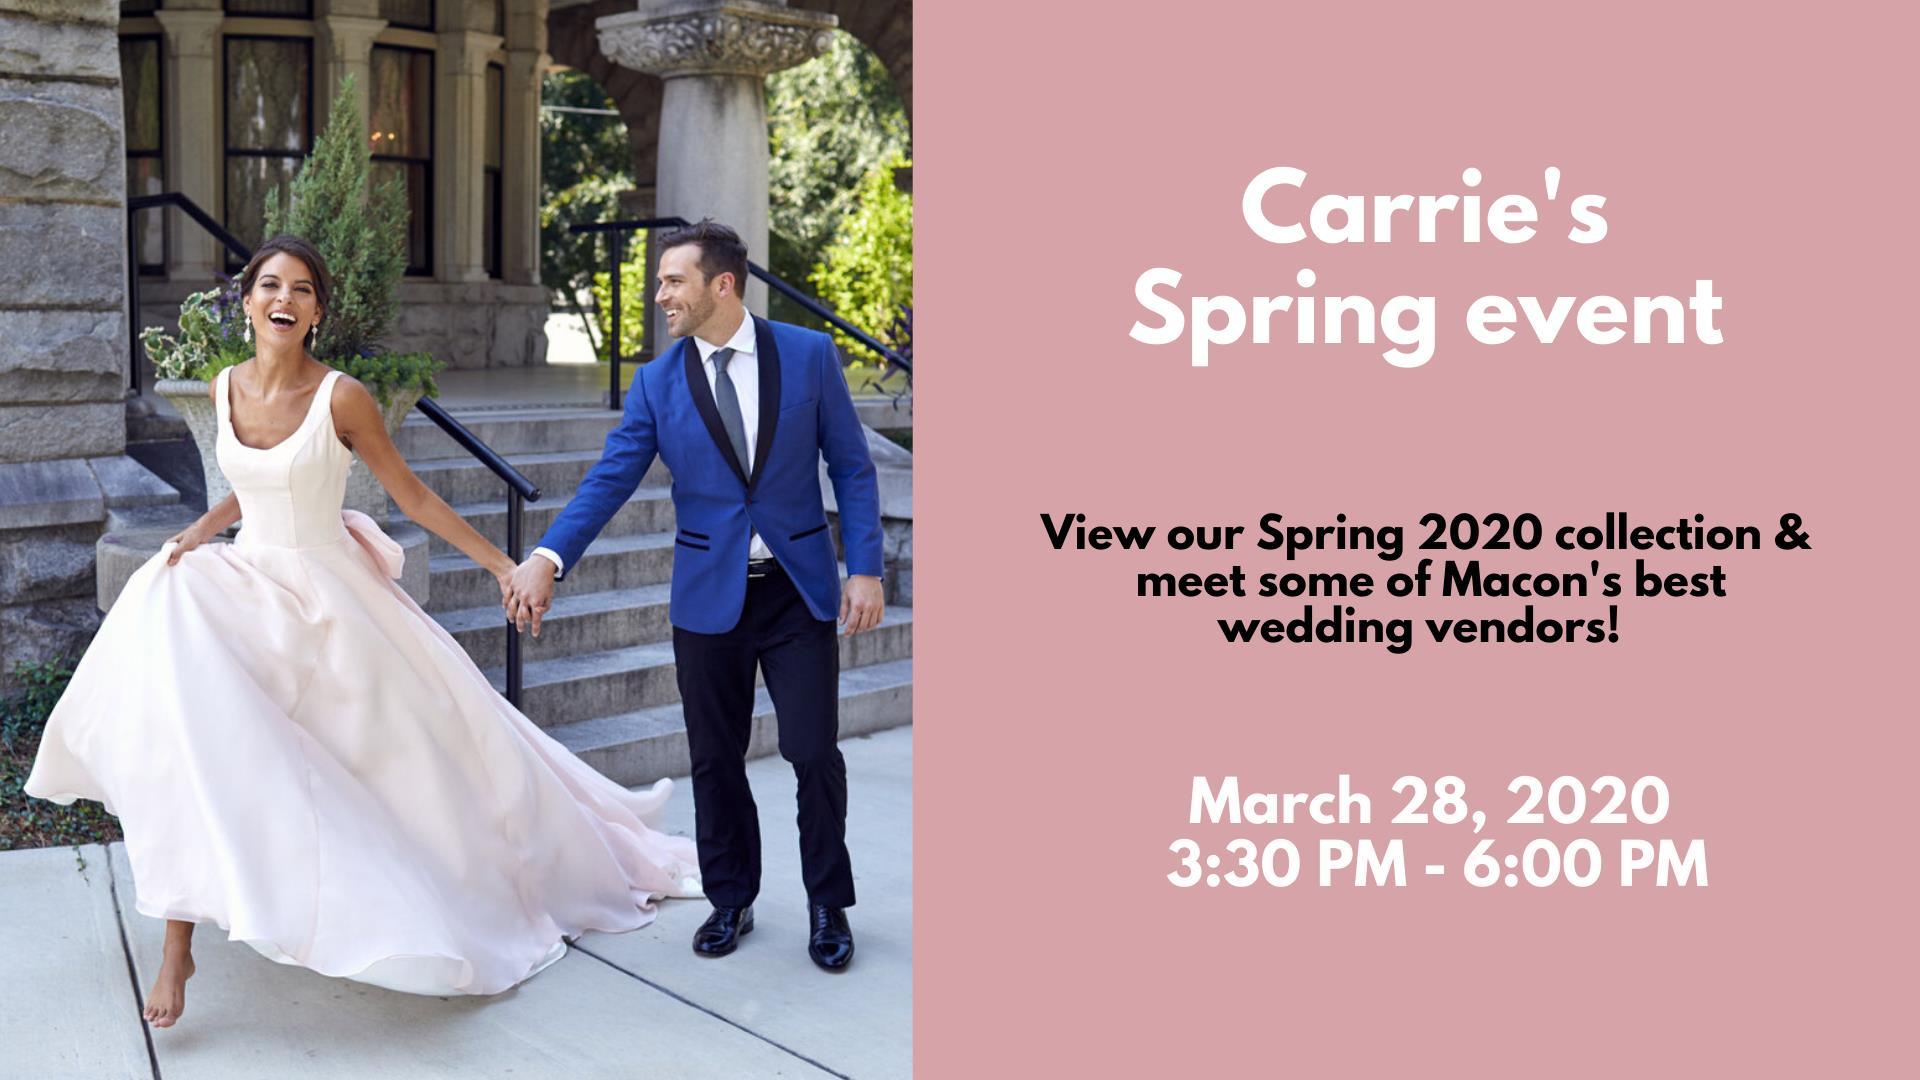 Carrie's Bridal Macon Spring Event - March 2020